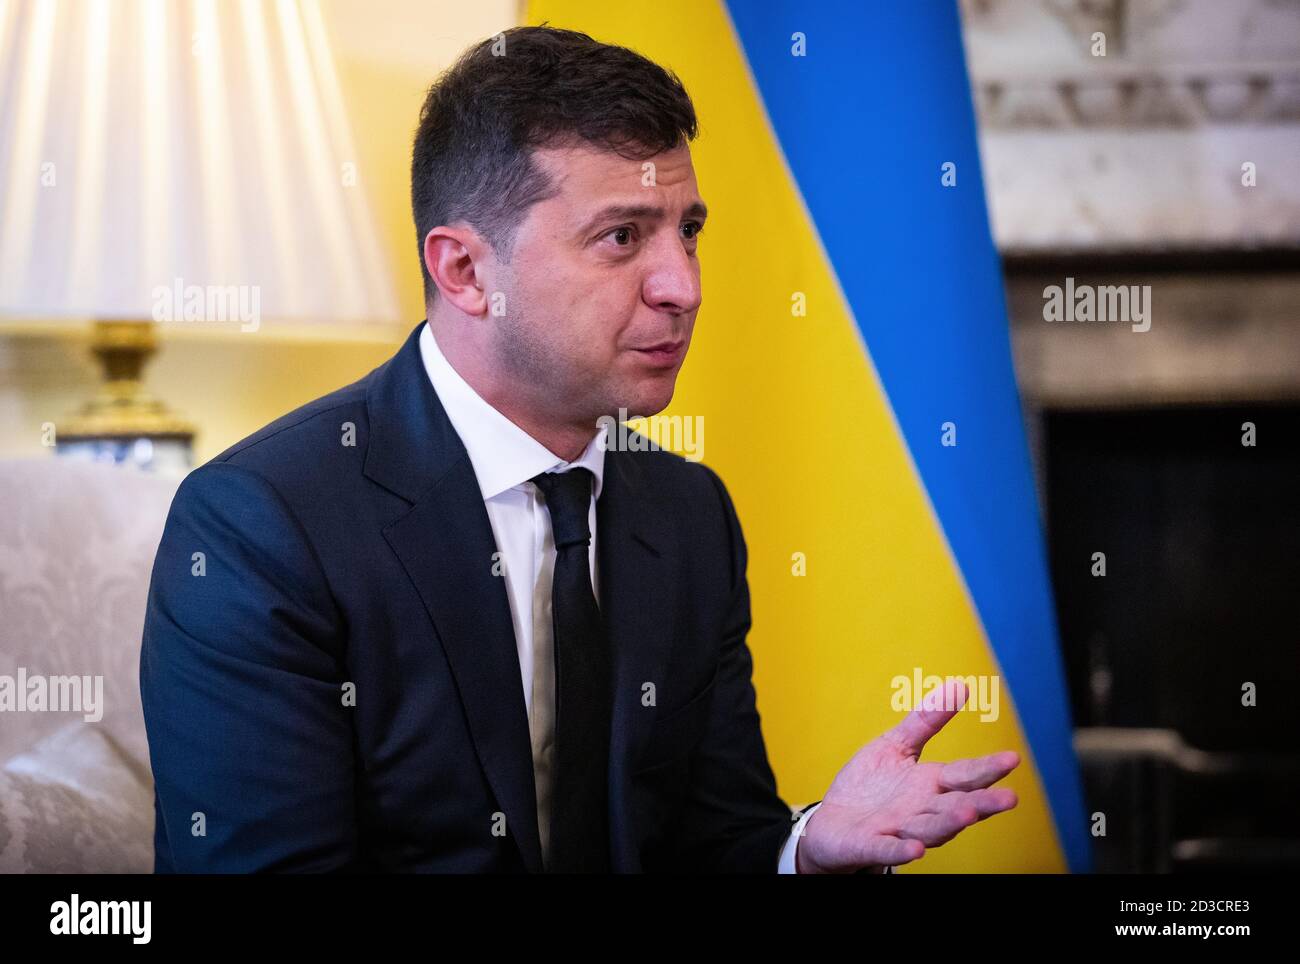 President of Ukraine, Volodymyr Zelenskyy during a meeting with Prime Minister Boris Johnson, in Downing Street , London, to sign a strategic partnership deal with the president in the face of Russia's 'destabilising behaviour' towards the country. Stock Photo